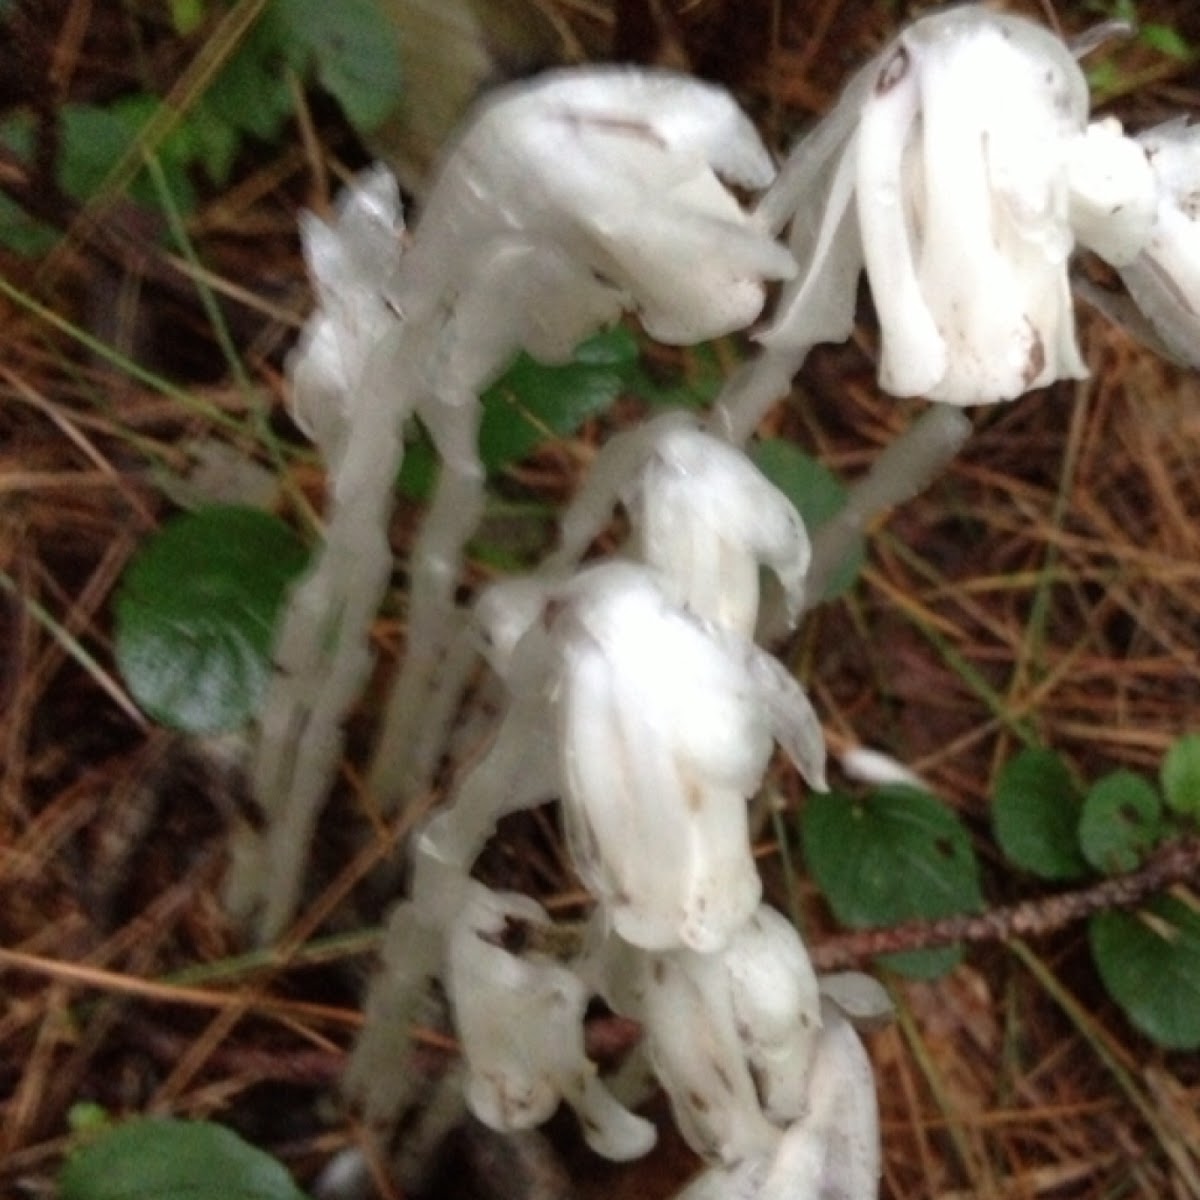 Indiana pipe plant or ghost plant